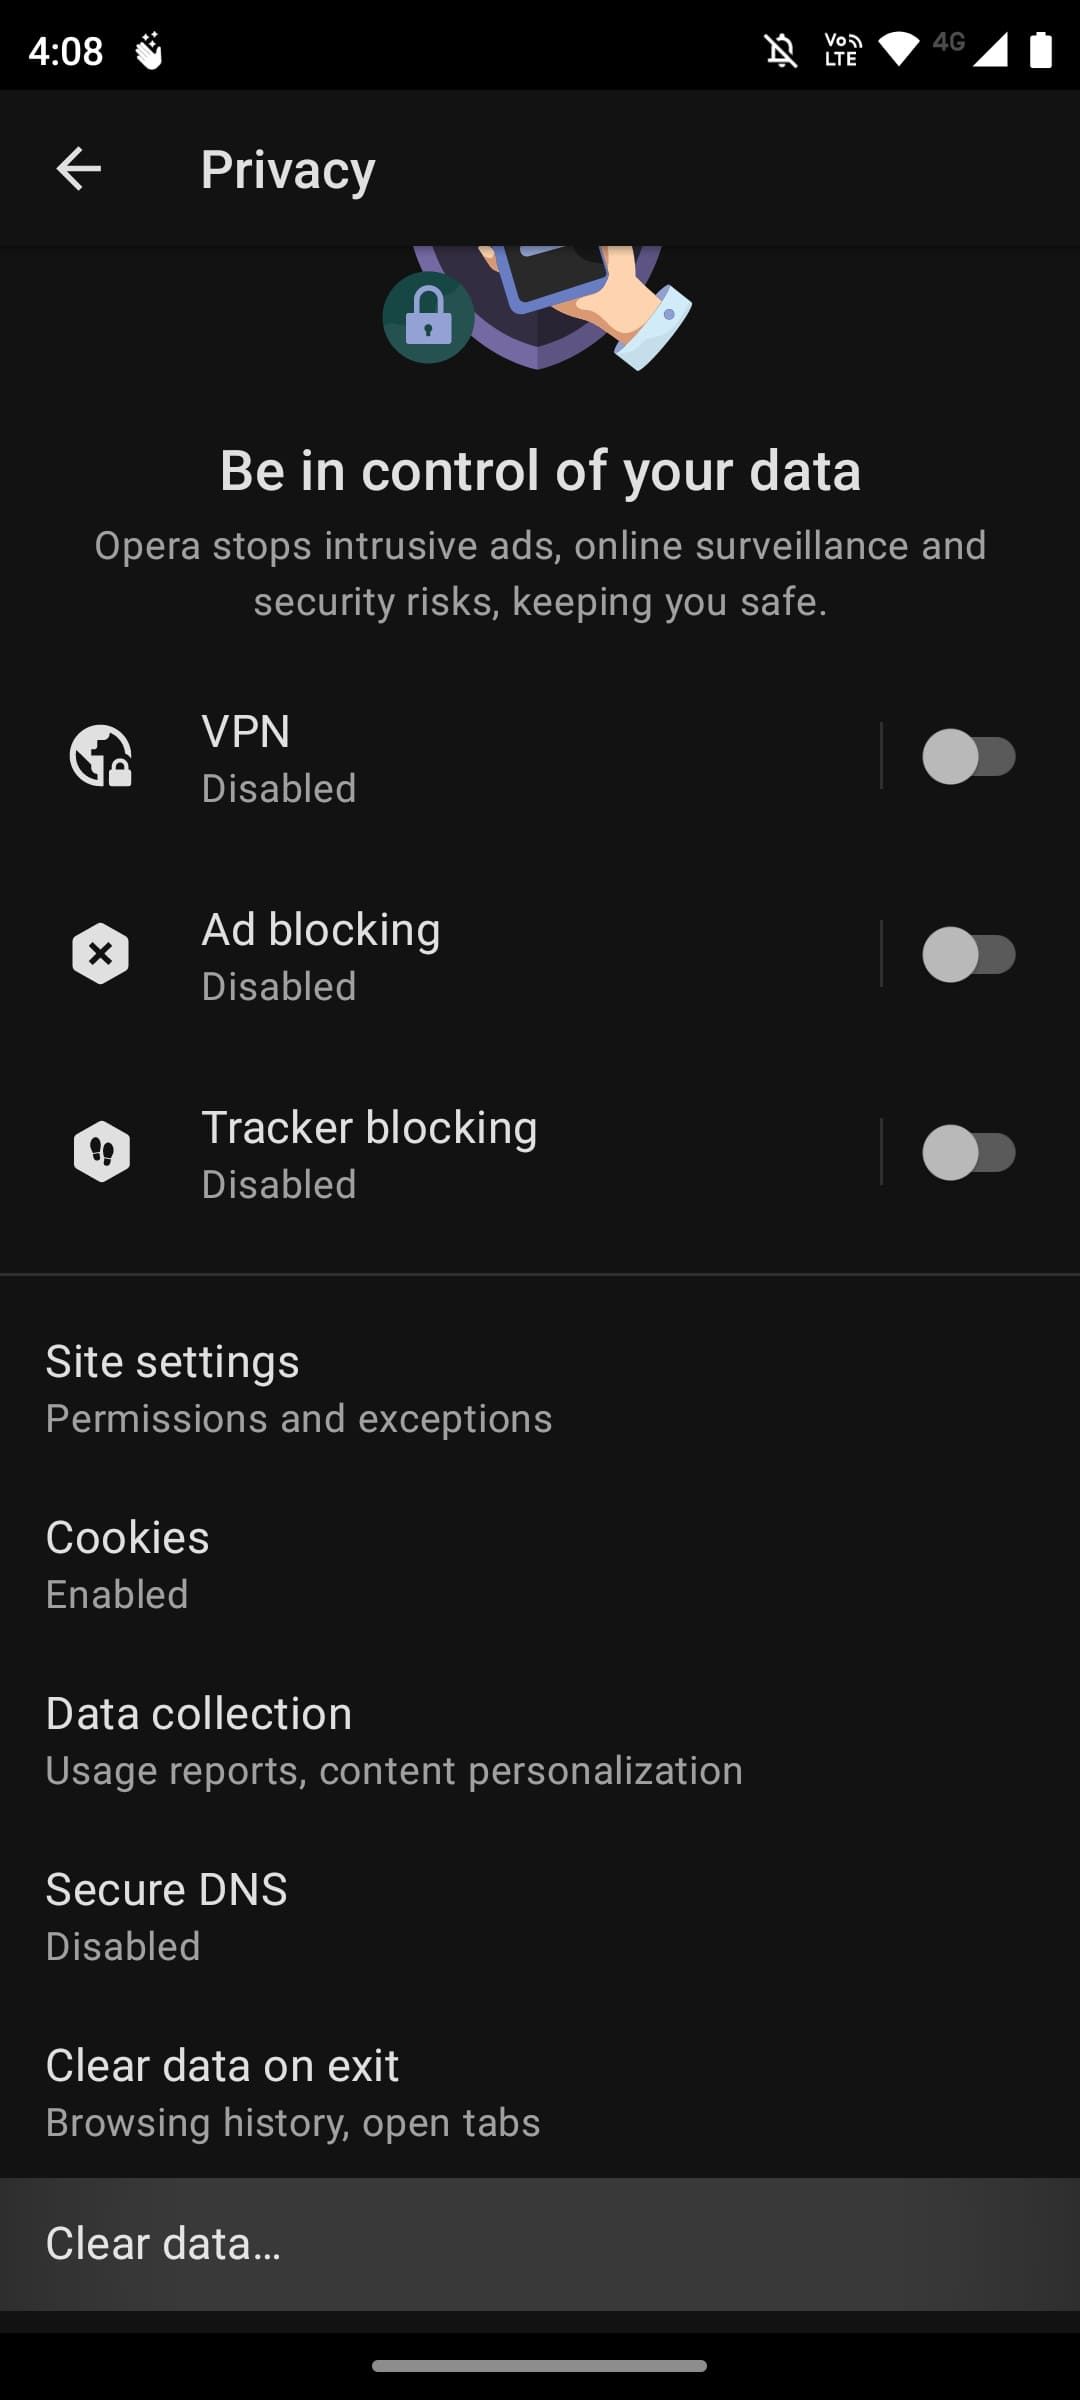 Privacy settings screen in Opera browser